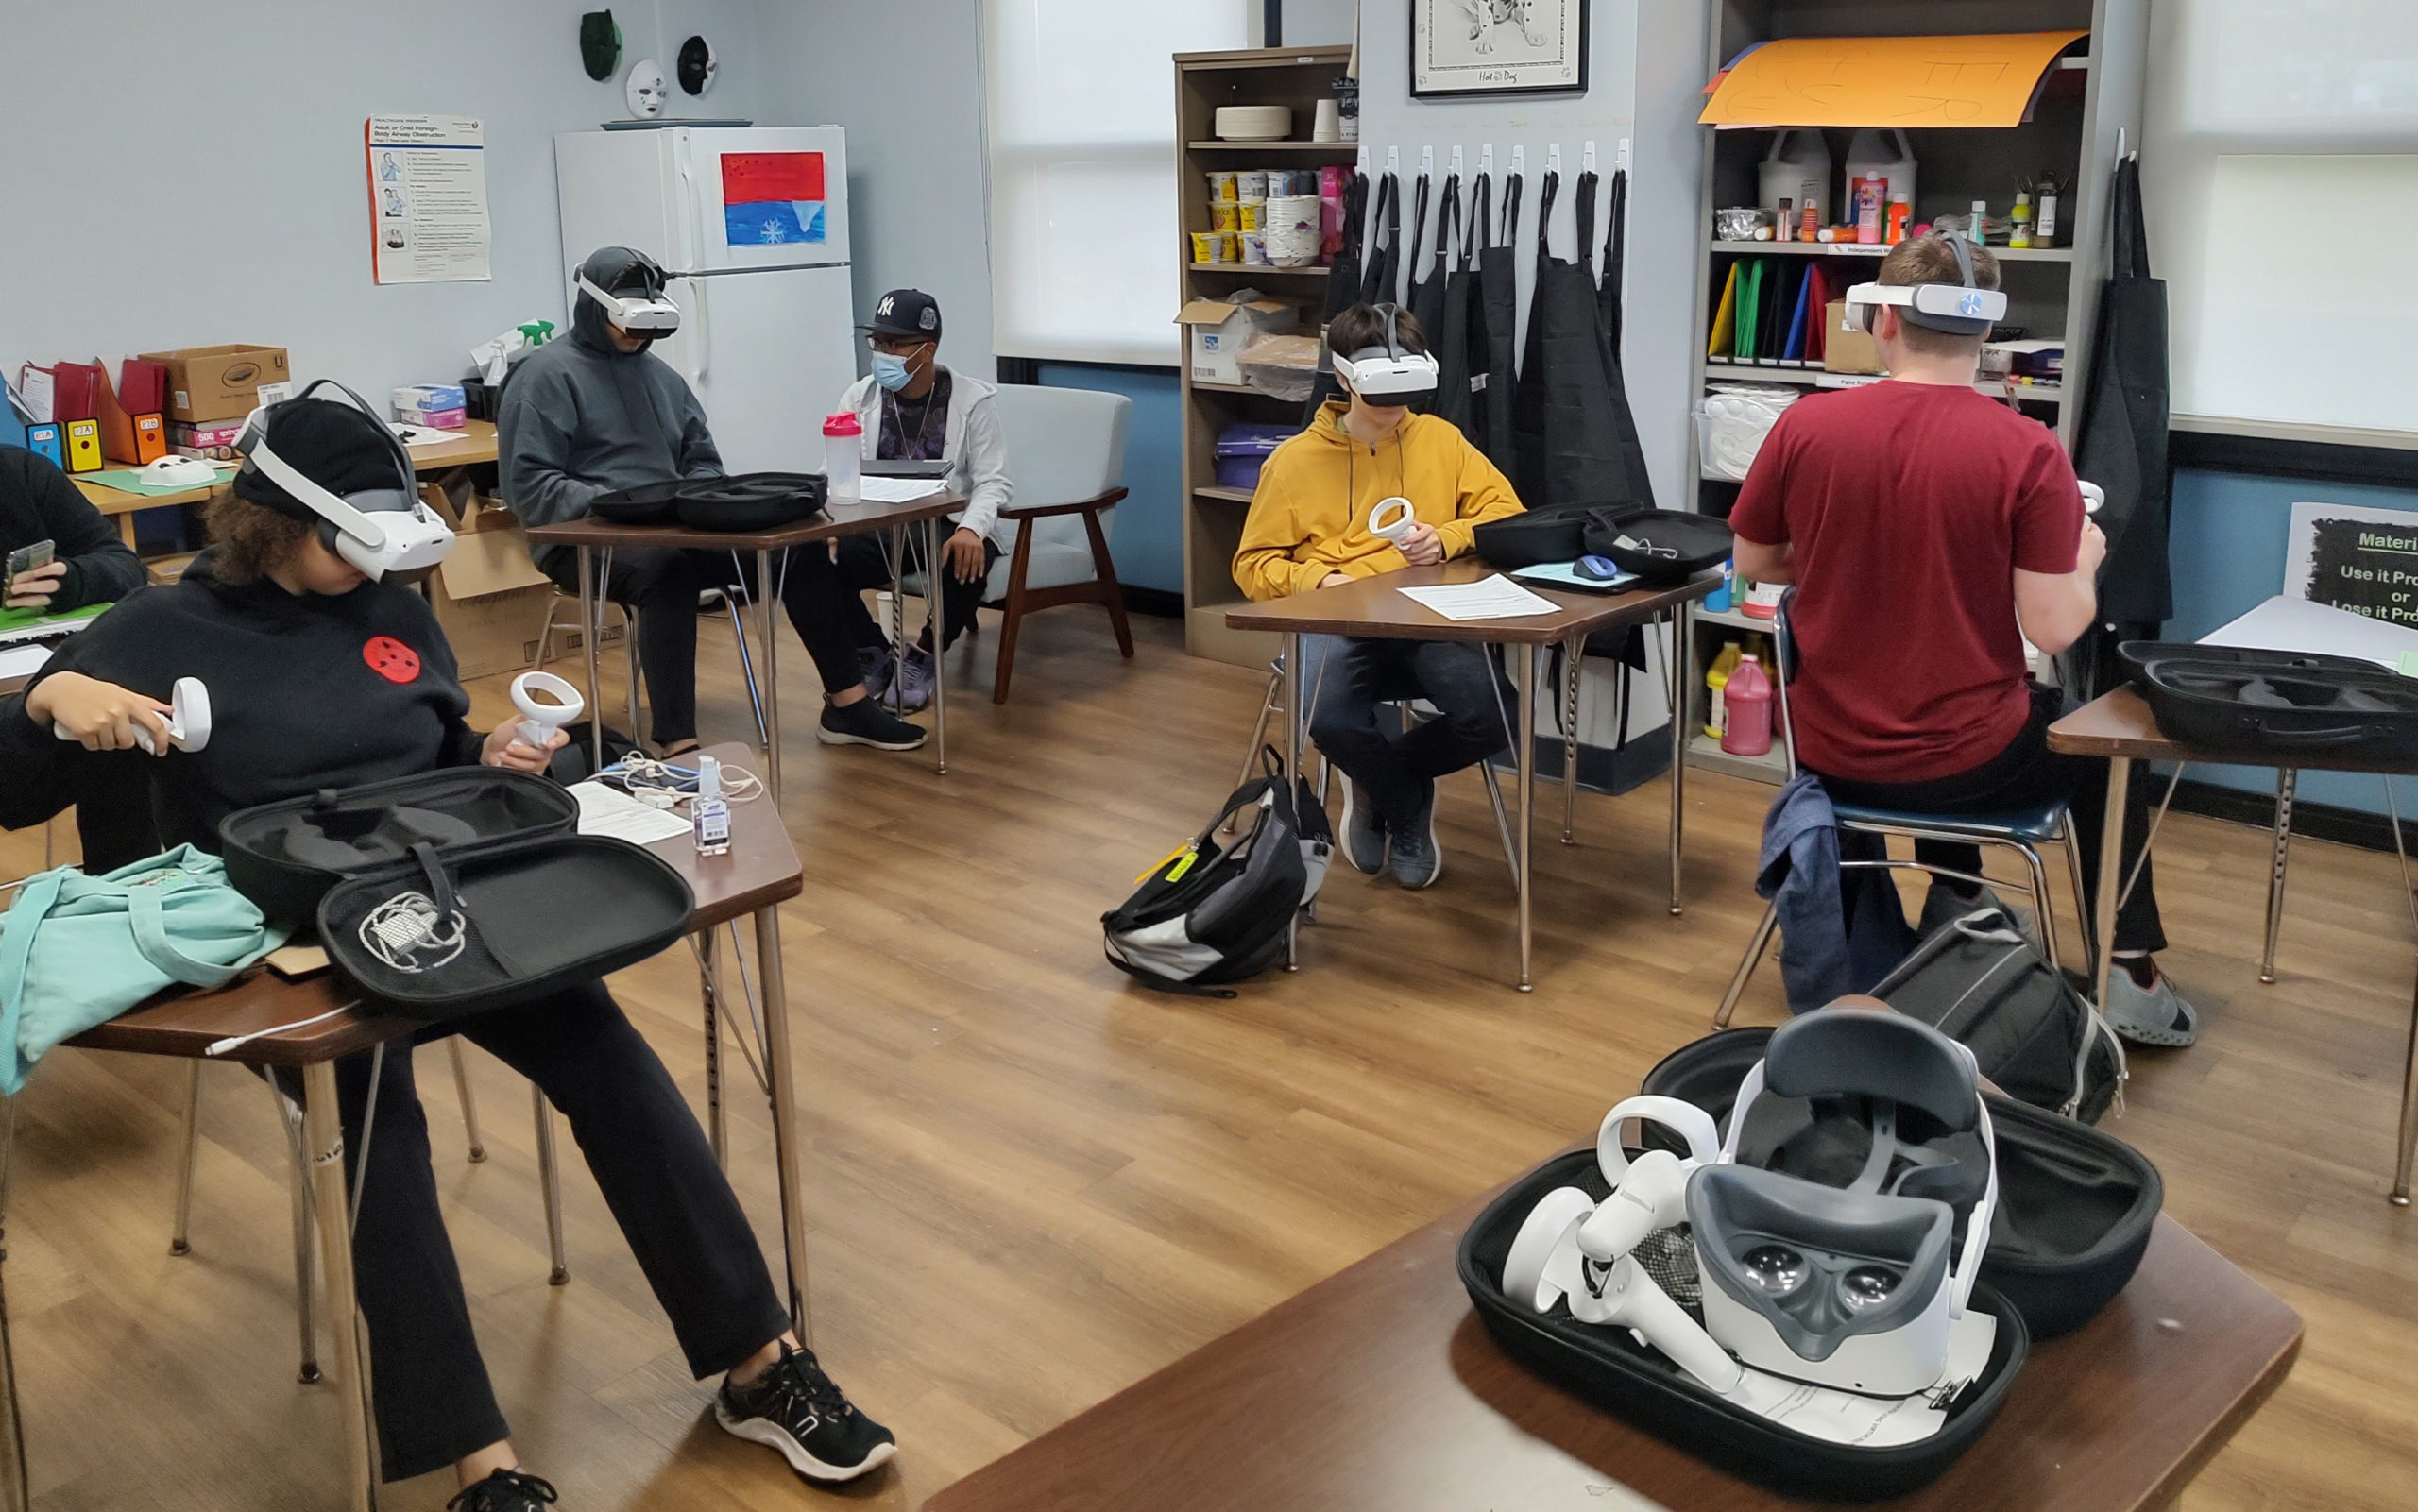 Students from Sackett Educational Center explore VR in their classroom